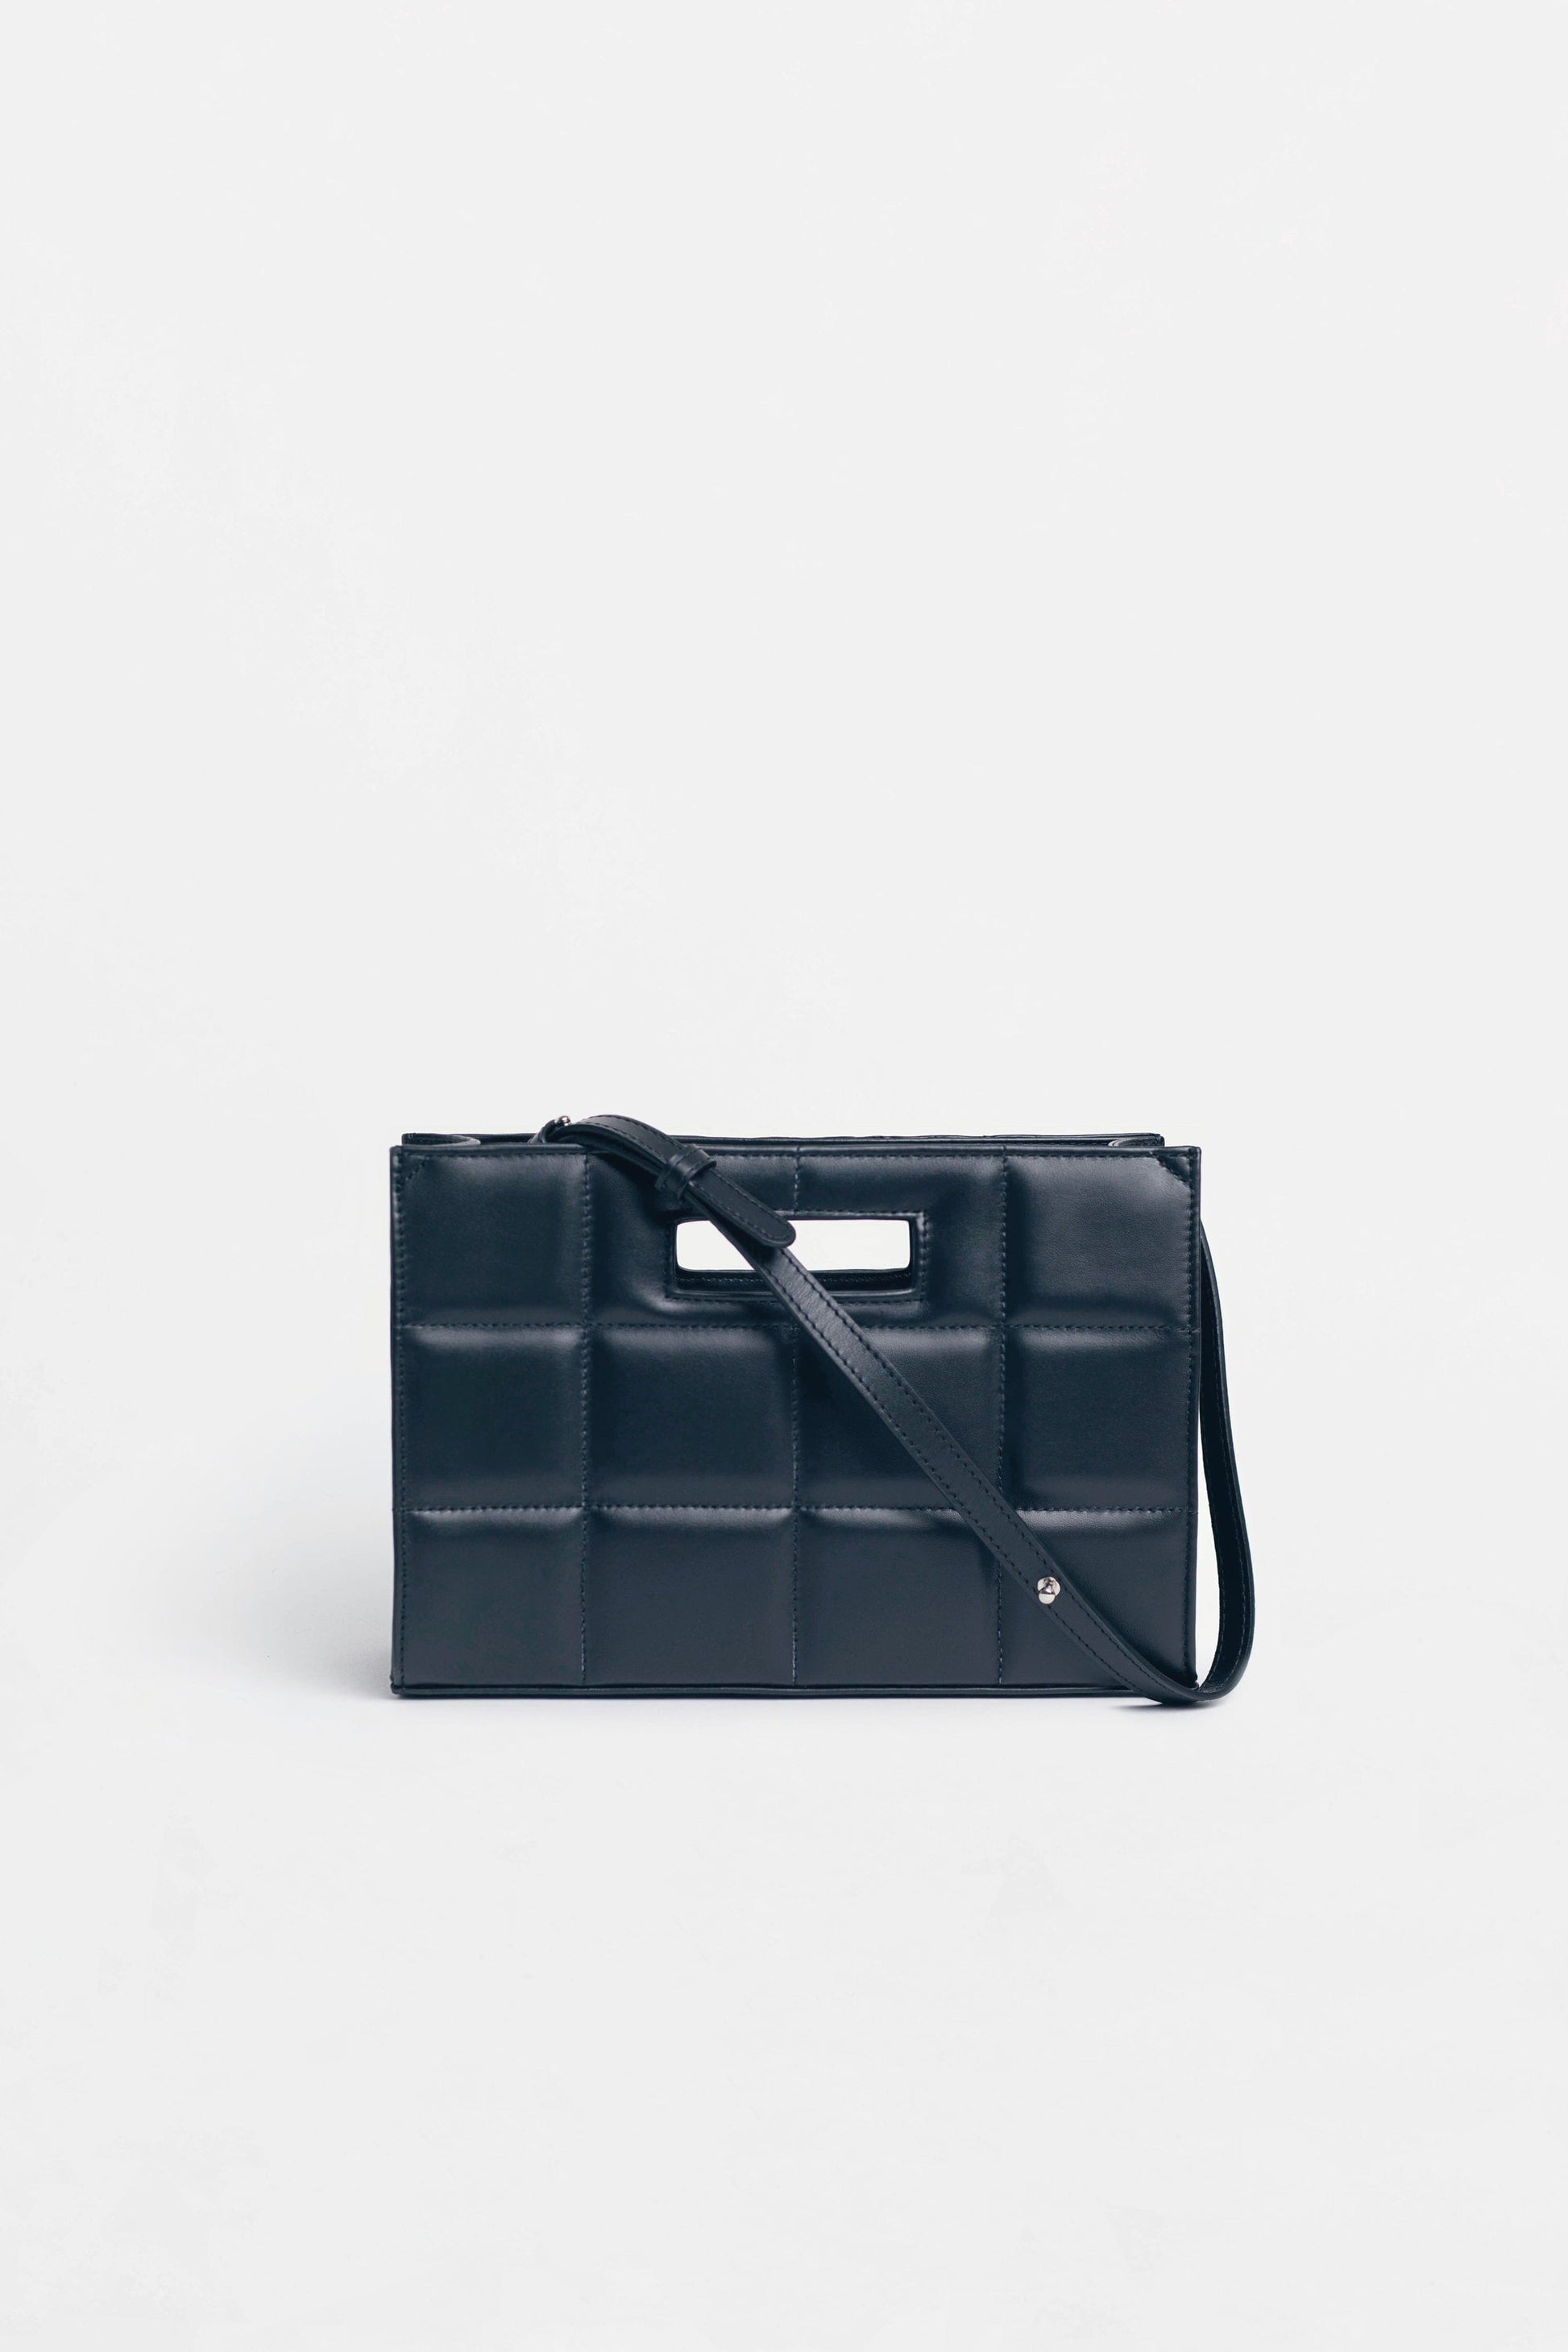 The QUILTED BAG SMALL Navy - JULIA SKERGETH